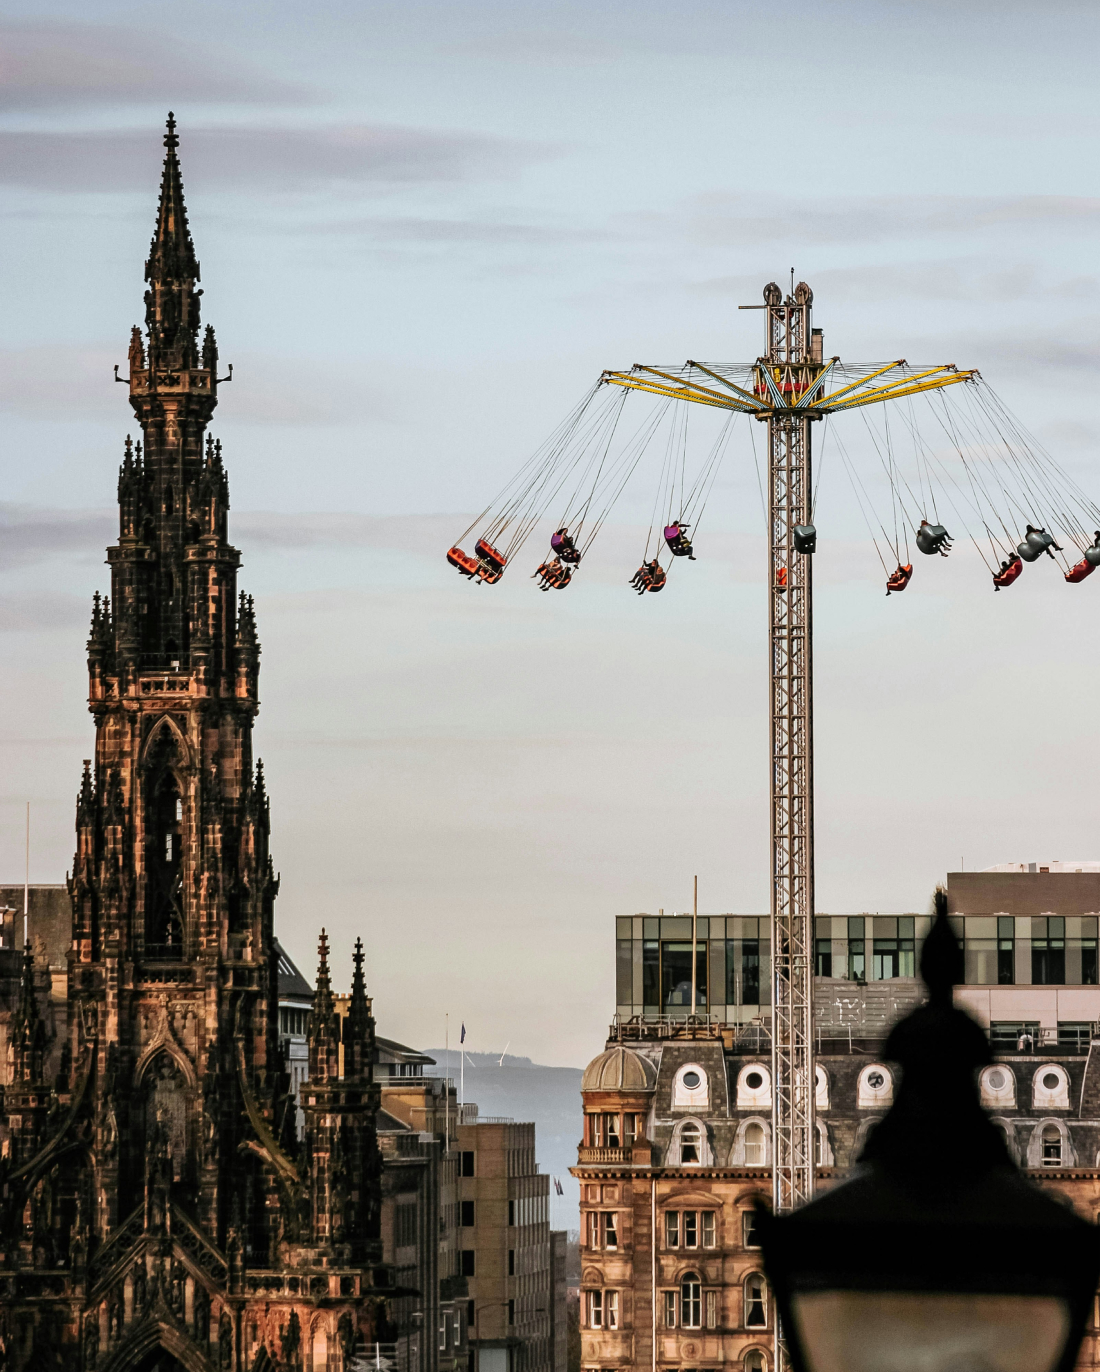 A towering swing ride spins against a cityscape featuring a gothic spire and modern buildings in reddish evening light.